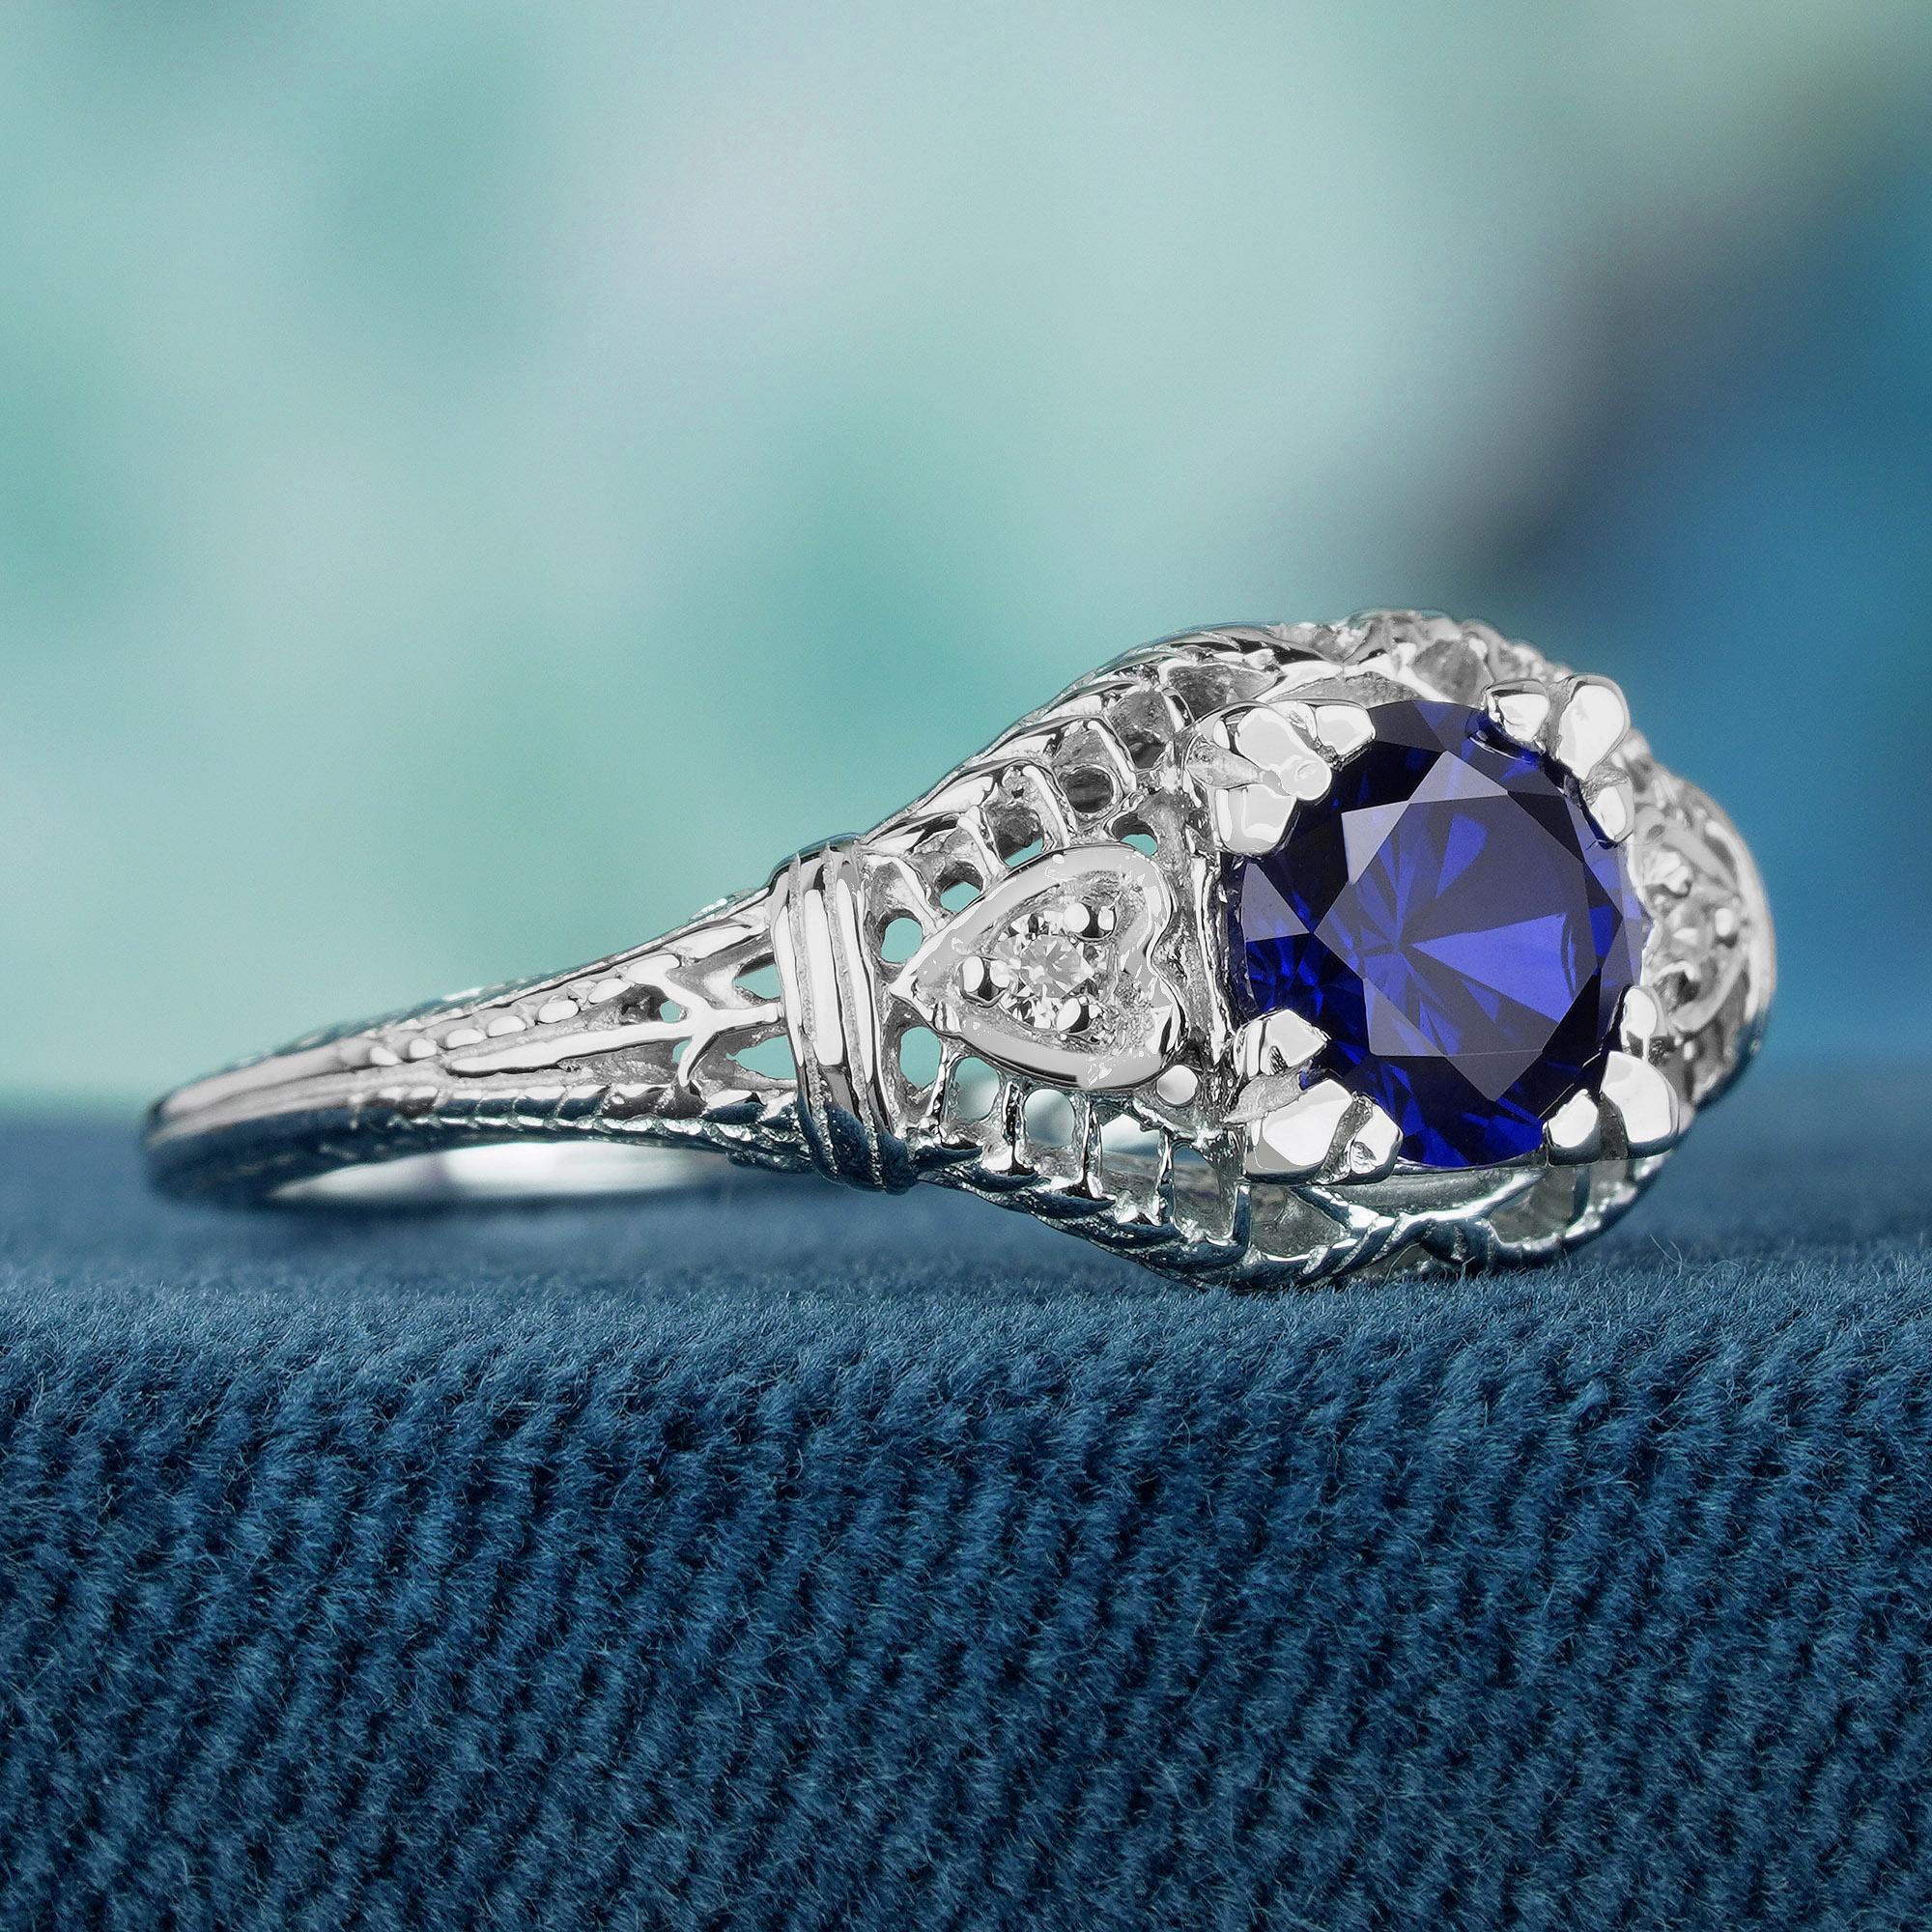 Crafted from luminous white gold with a delicate milgrain finish, this enchanting ring boasts a captivating natural blue sapphire at its core, accented by glistening diamonds. Intricate filigree detailing adorns the band, evoking a timeless vintage